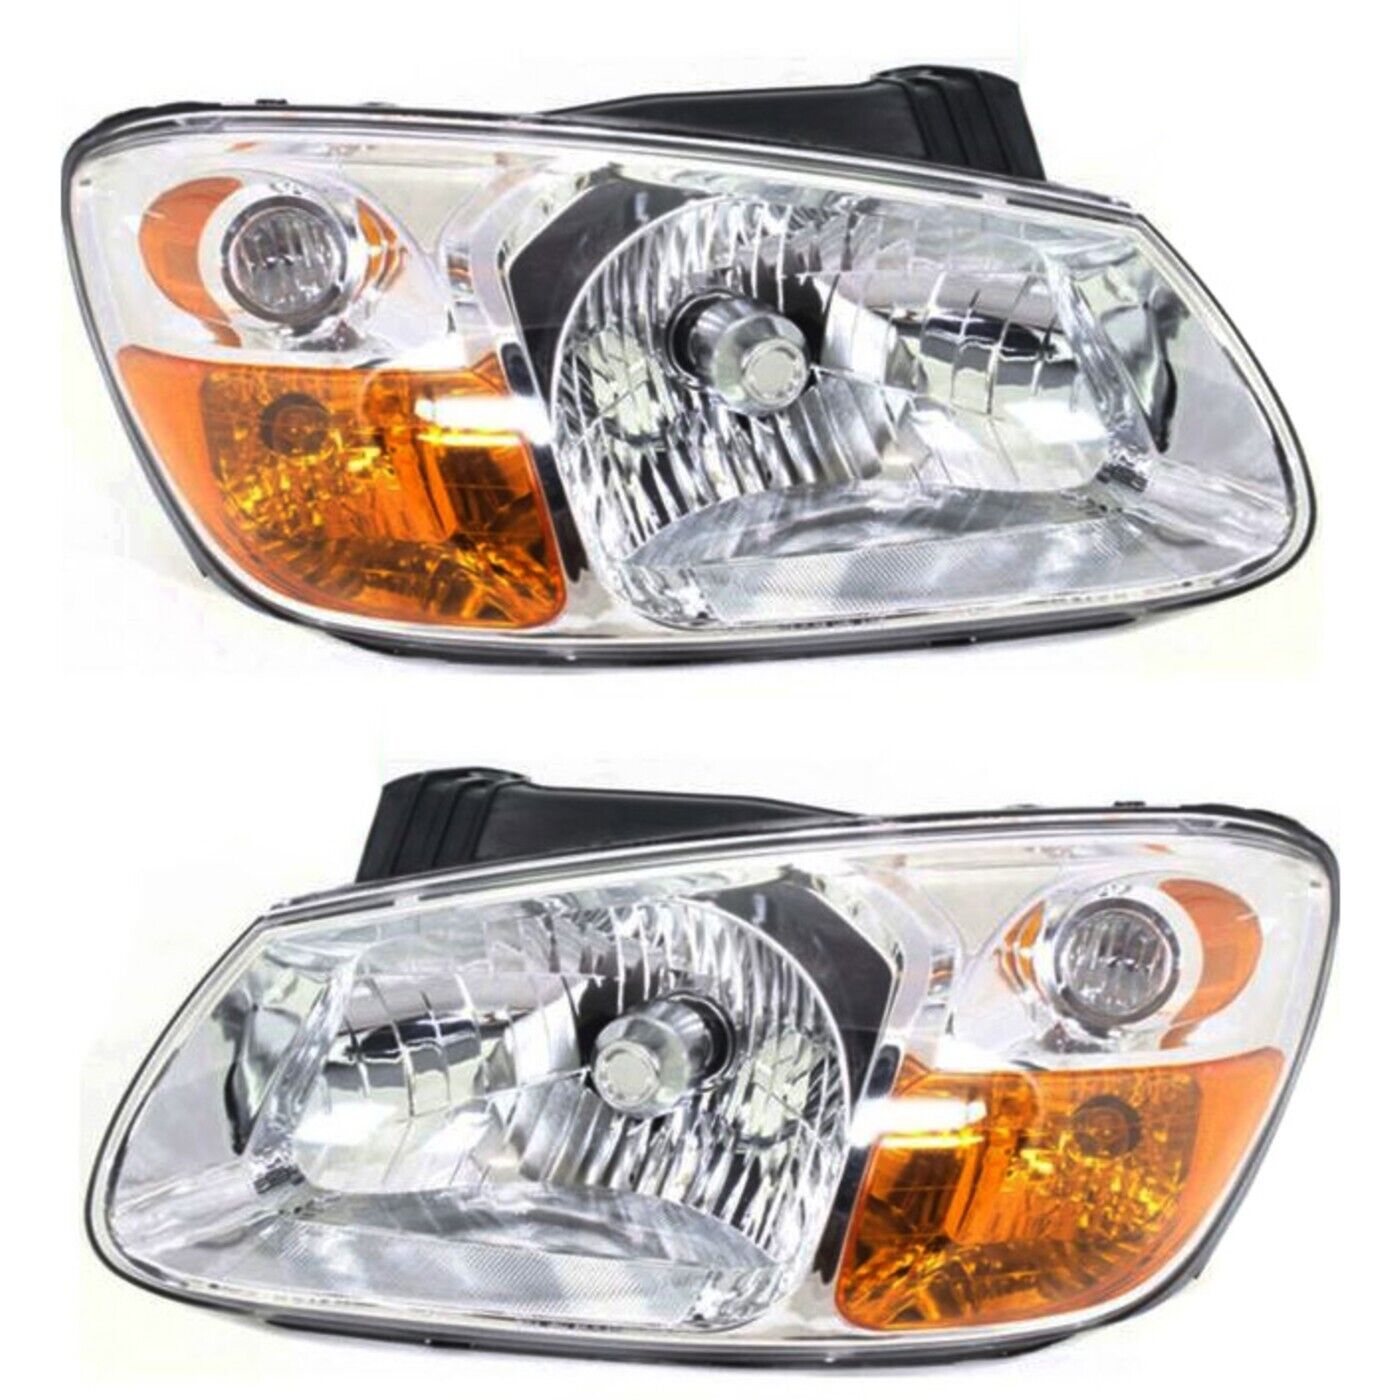 Headlight Set For 2007-2009 Kia Spectra Left and Right With Bulb 2Pc